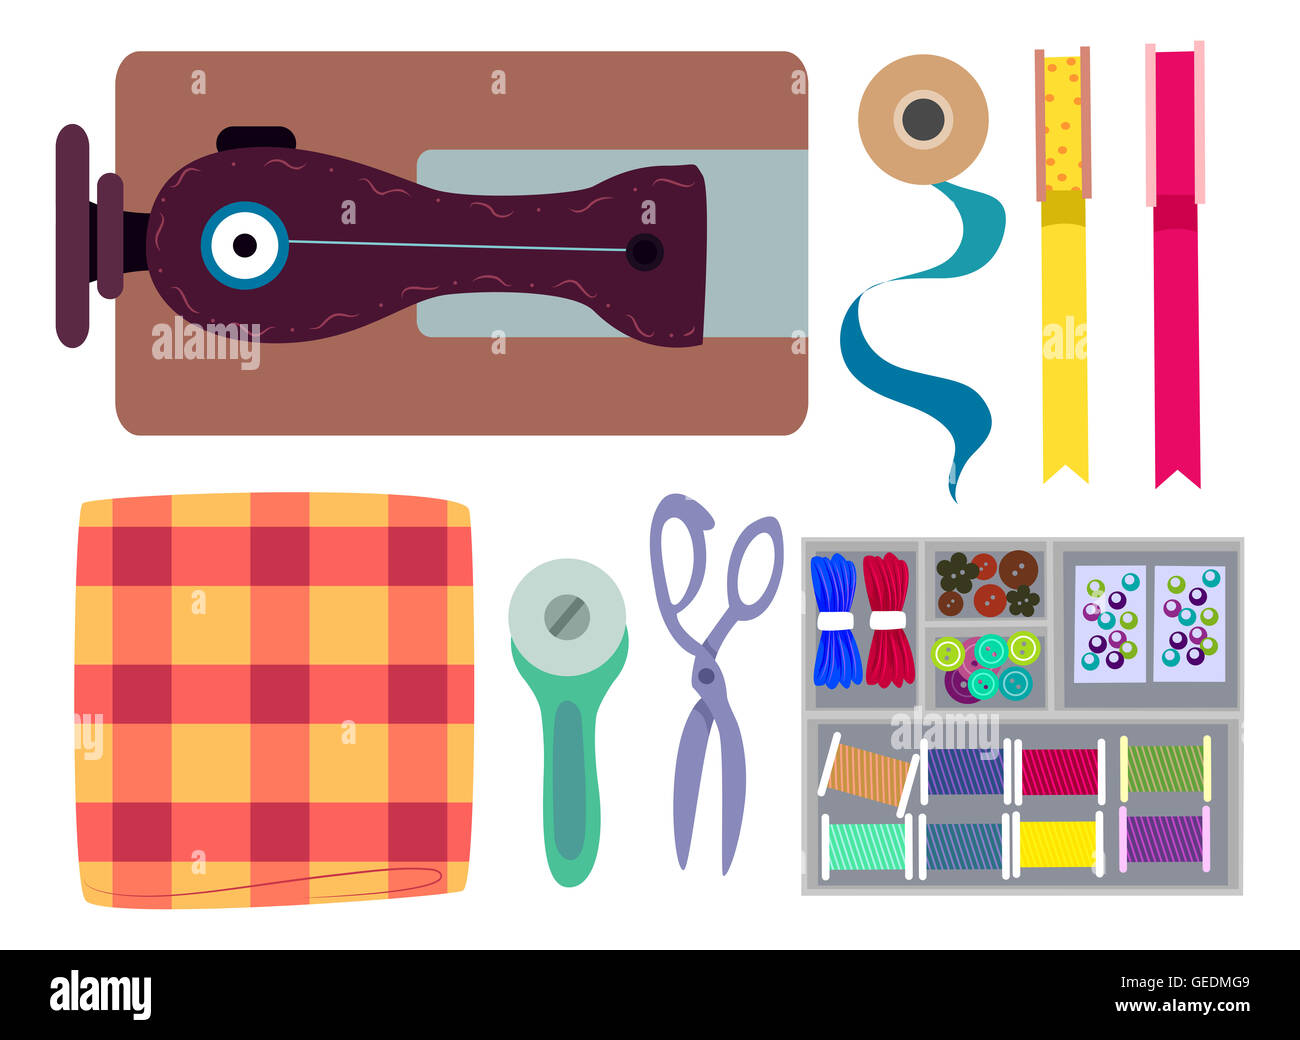 Top View Illustration of Sewing Elements Stock Photo